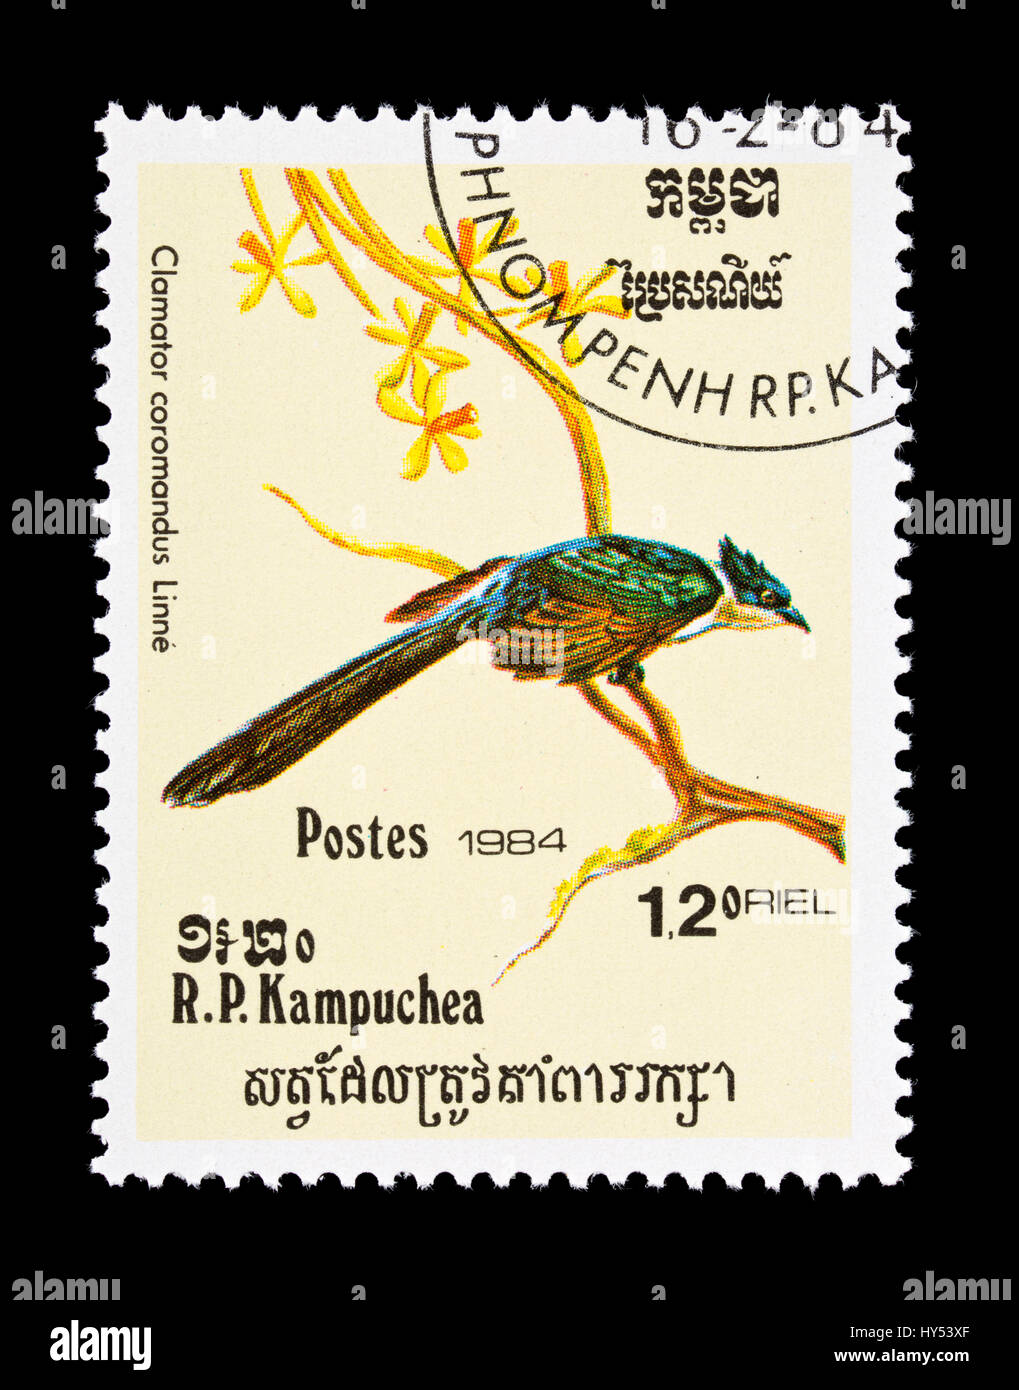 Postage stamp from Cambodia (Kampuchea) depicting a chestnut-winged cuckoo or red-winged crested cuckoo (Clamator coromandus) Stock Photo